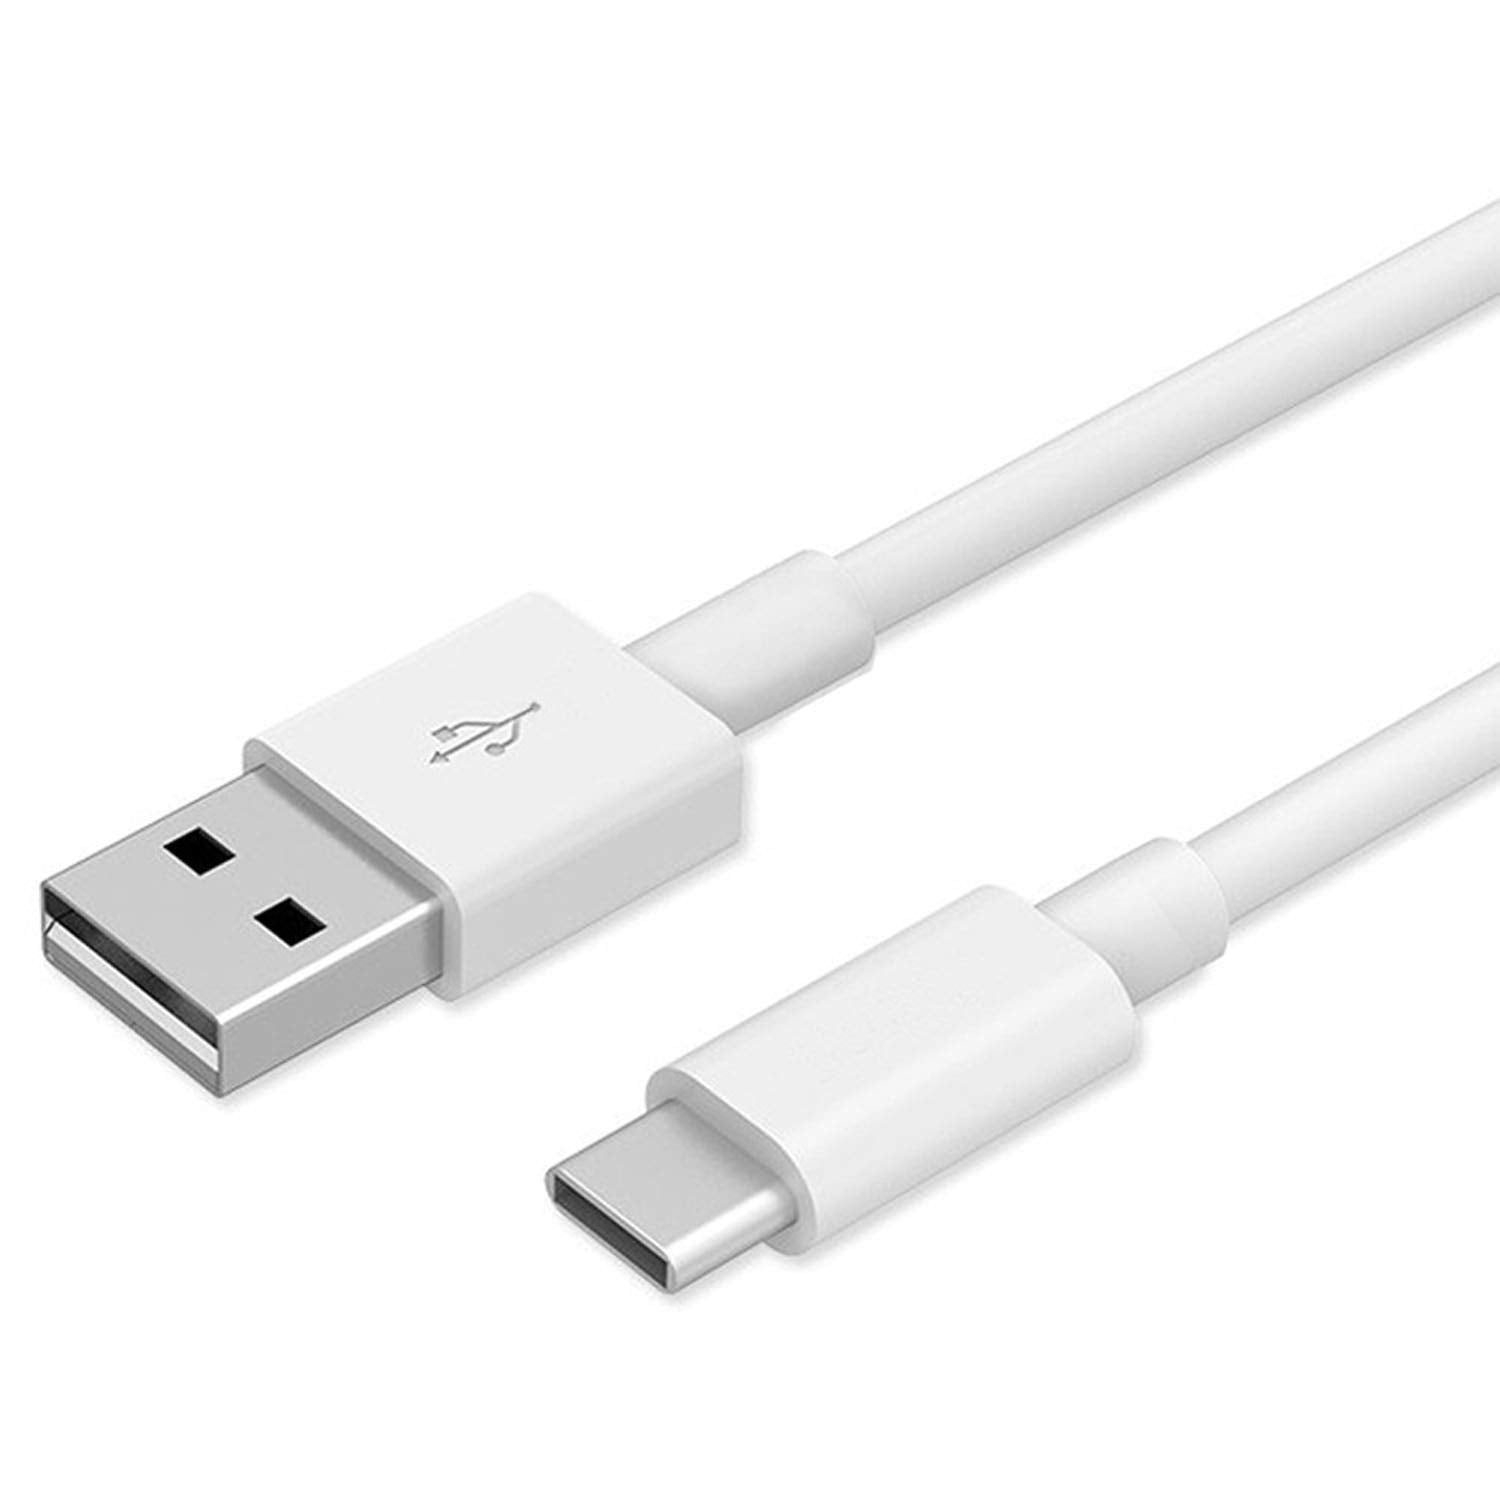 Samsung Galaxy A42 5G Support 15W Adaptive Fast Charge Type-C Cable White